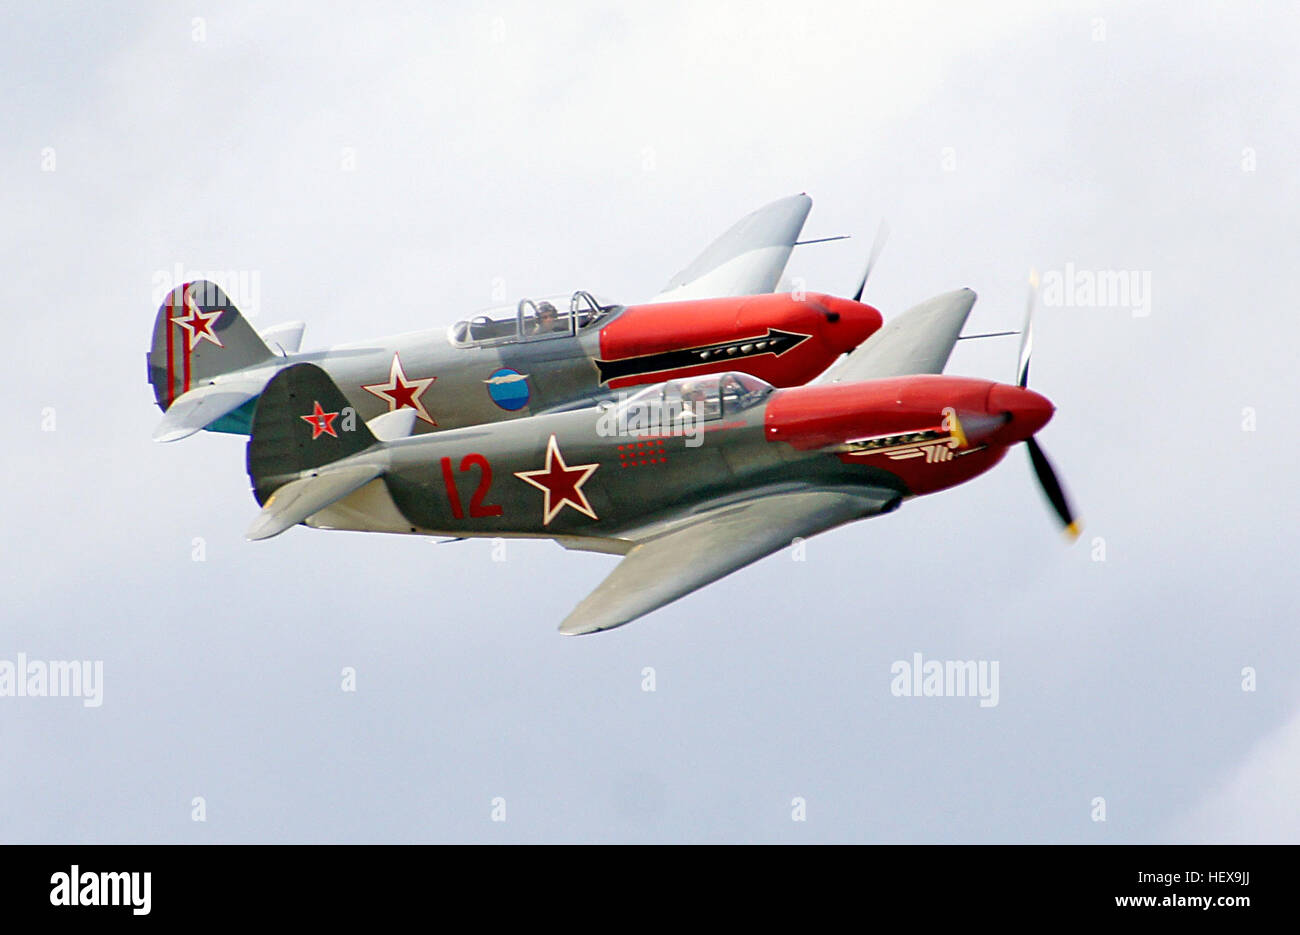 The Yakovlev Yak-3  was a World War II Soviet fighter aircraft. Robust and easy to maintain, it was much liked by pilots and ground crew alike. It was one of the smallest and lightest major combat fighters fielded by any combatant during the war, and its high power-to-weight ratio gave it excellent performance. It proved a formidable dogfighter. Marcel Albert, the official top-scoring World War II French ace, who flew the Yak in USSR with the Normandie-Niémen Group, considered it a superior aircraft to the P-51D Mustang and the Supermarine Spitfire.  After the war ended, it flew with the Yugos Stock Photo